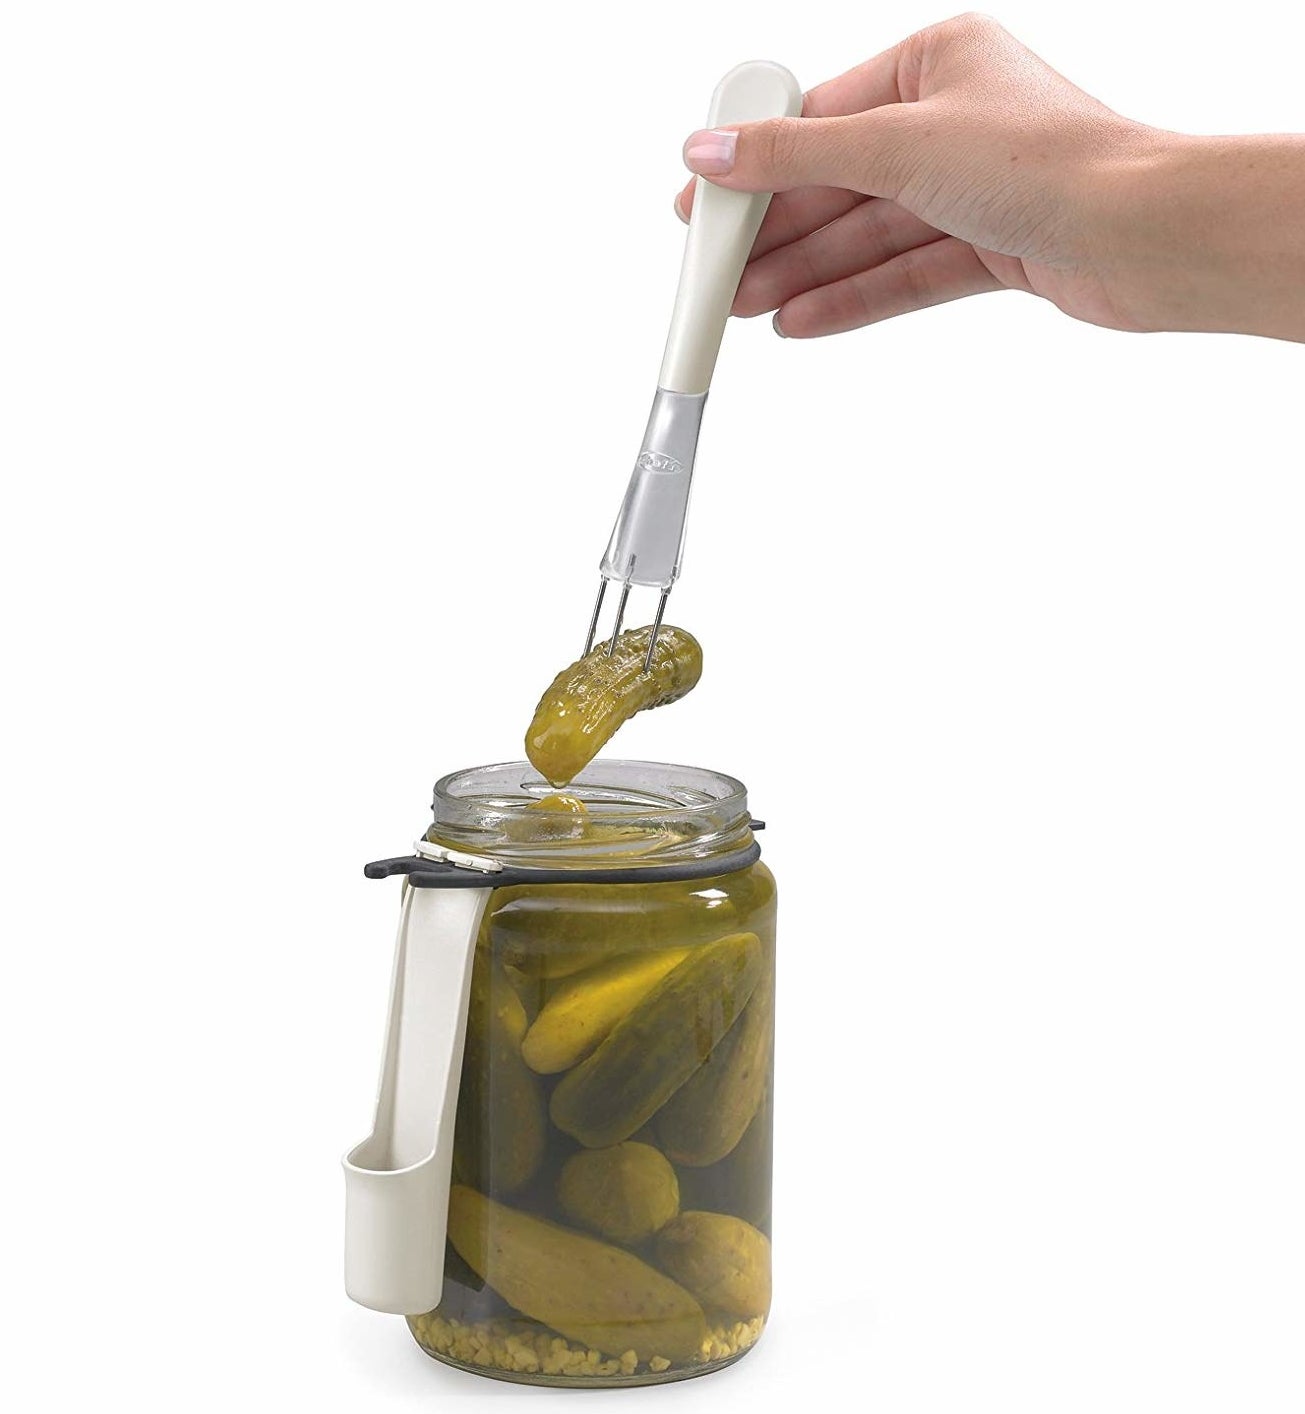 a hand using the condiment fork to take a pickle out of a jar